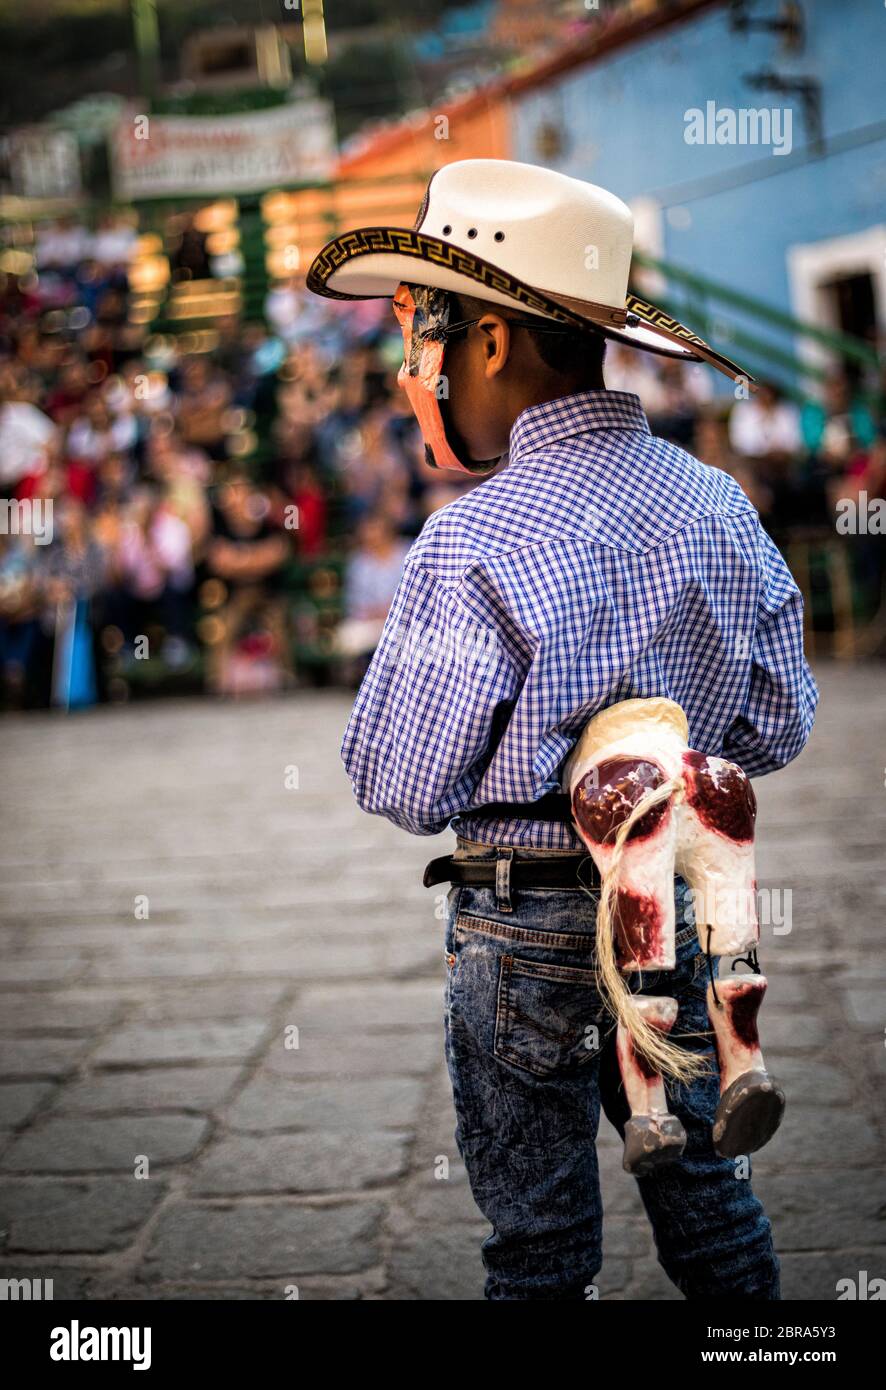 A boy waits for his part in a play on San Roque Plaza in the city of Guanajuato, Mexico. Stock Photo